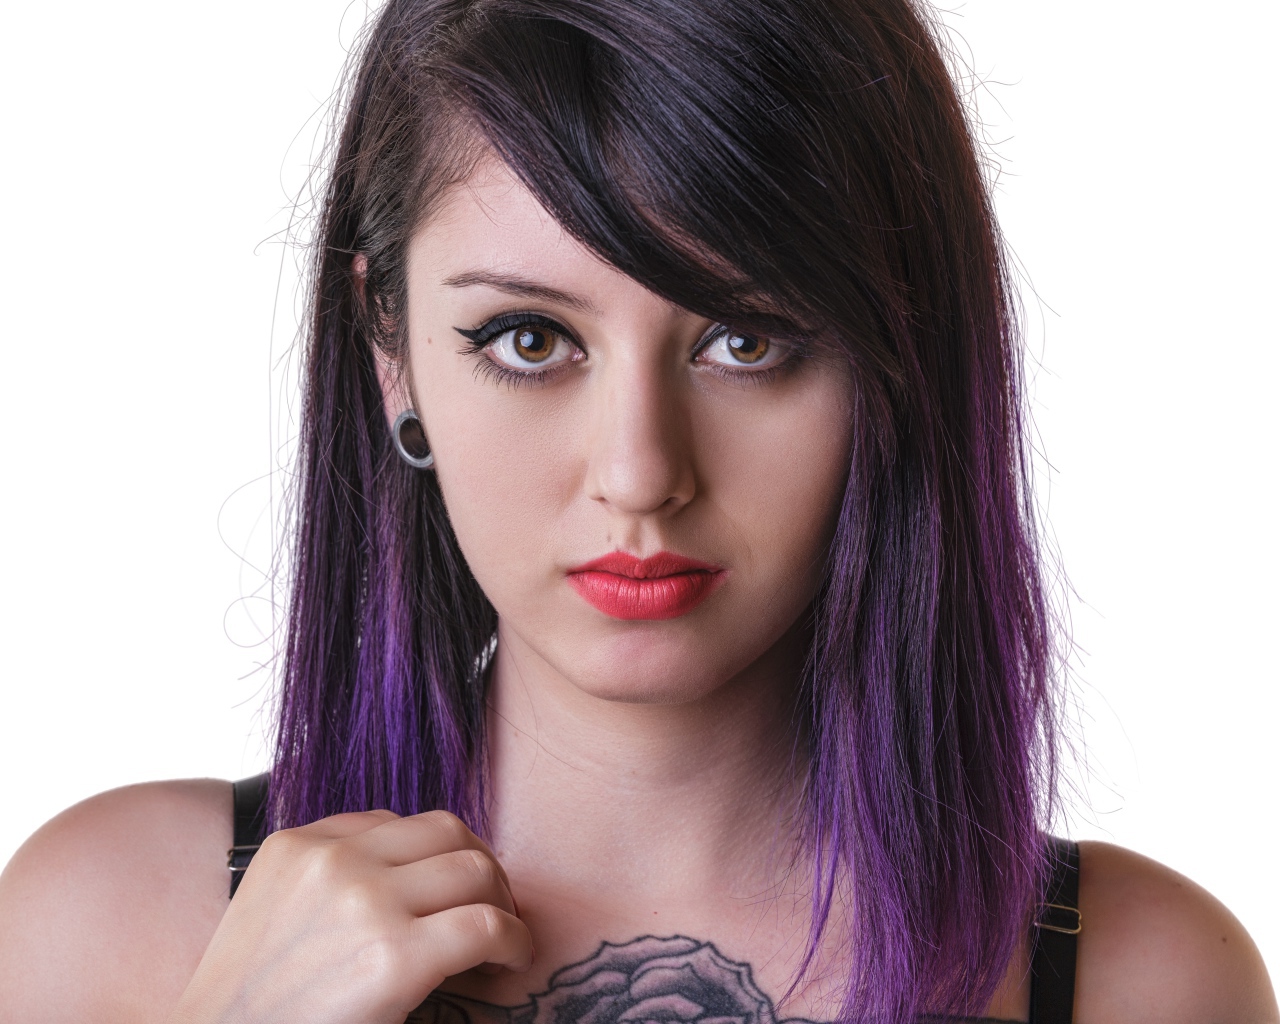 Girl with tattoos and dyed hair